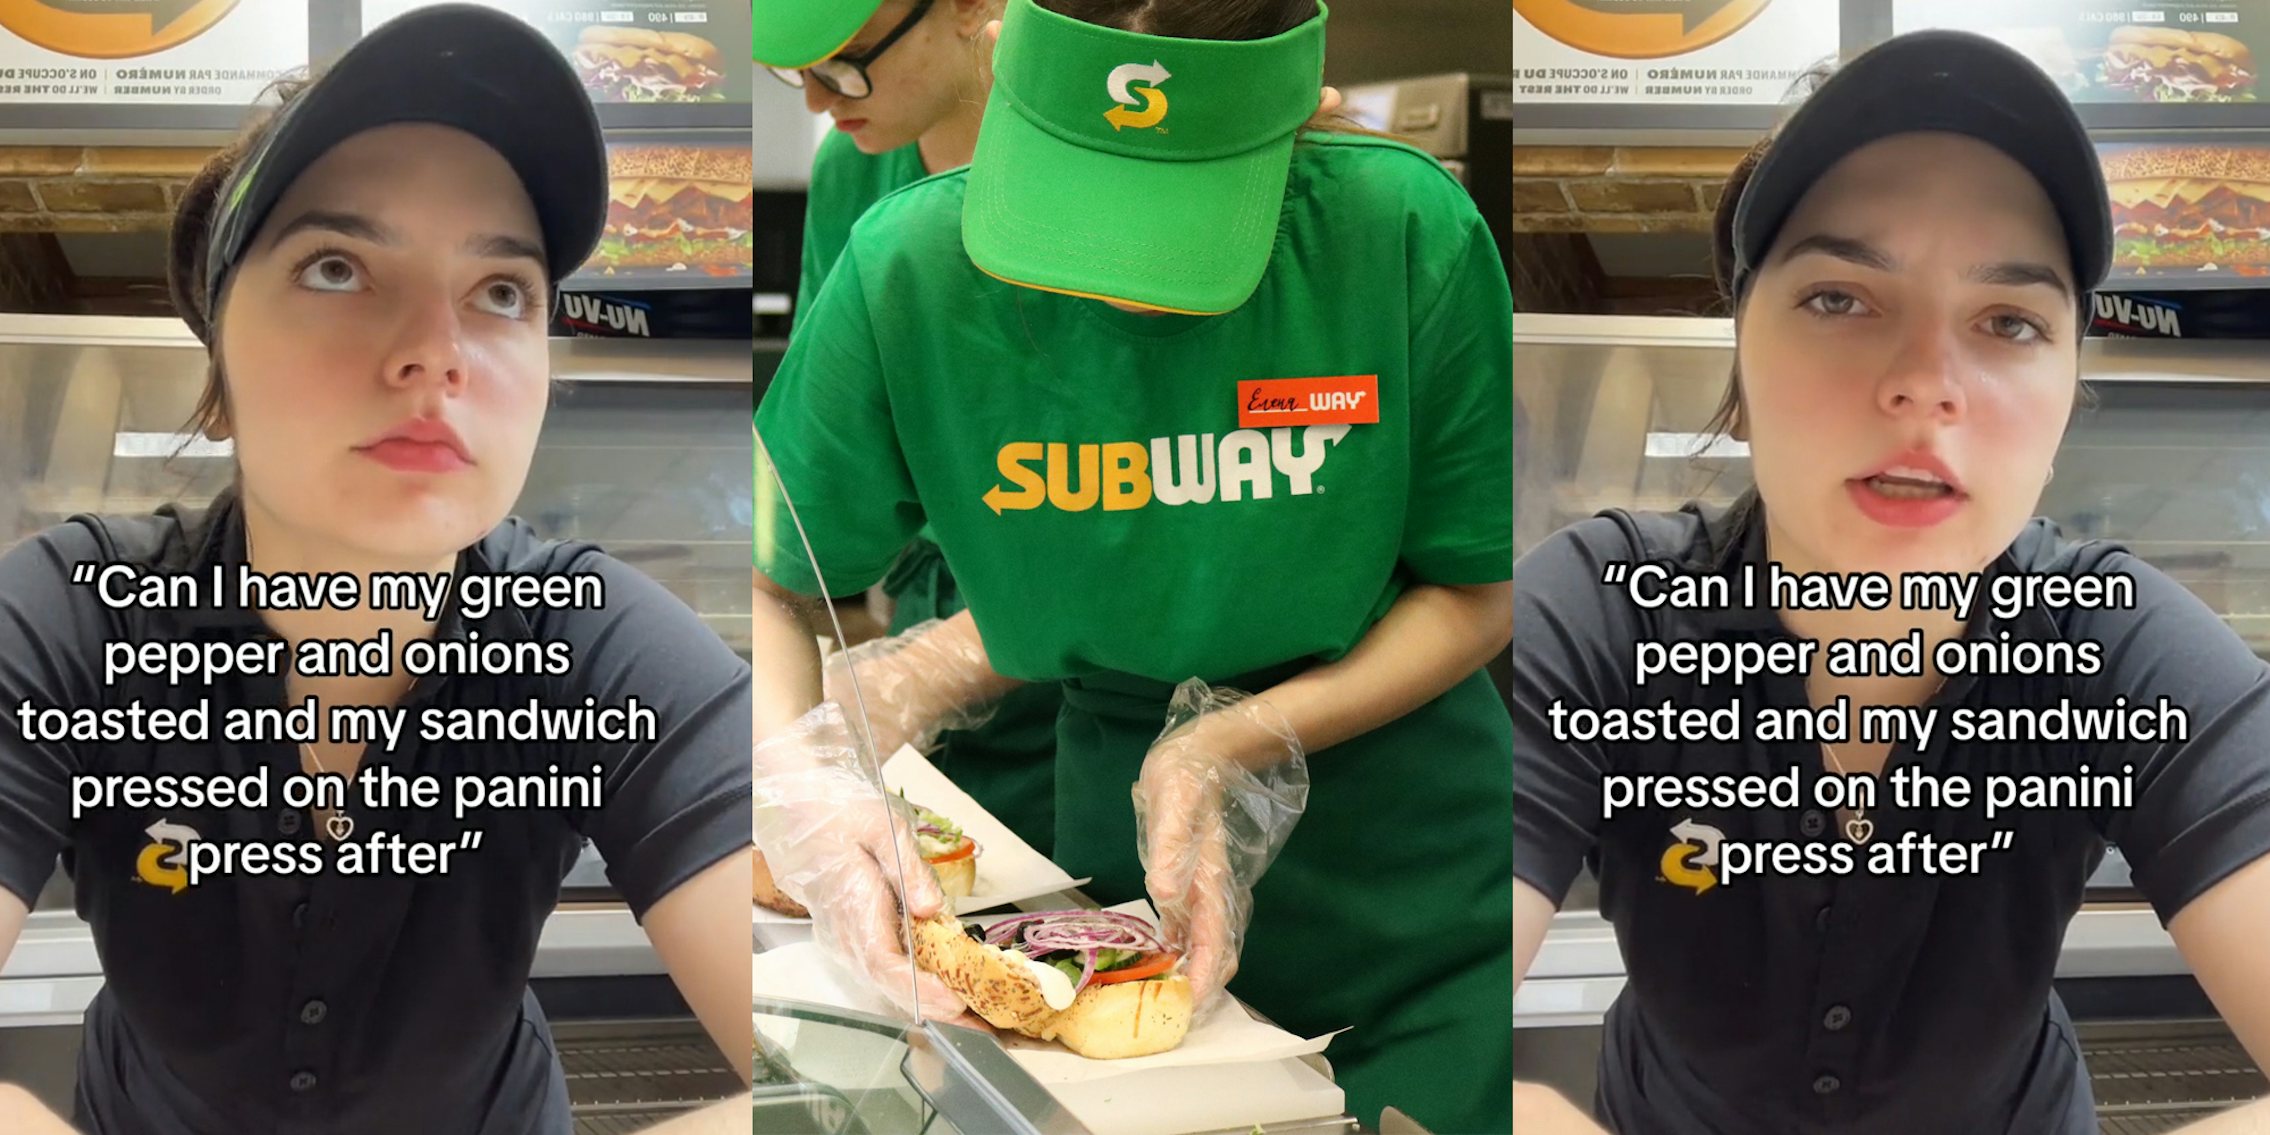 Subway employee with caption ''Can I have my green pepper and onions toasted and my sandwich pressed on the panini press after'' (l) Subway employee making sandwich (c) Subway employee with caption ''Can I have my green pepper and onions toasted and my sandwich pressed on the panini press after'' (r)